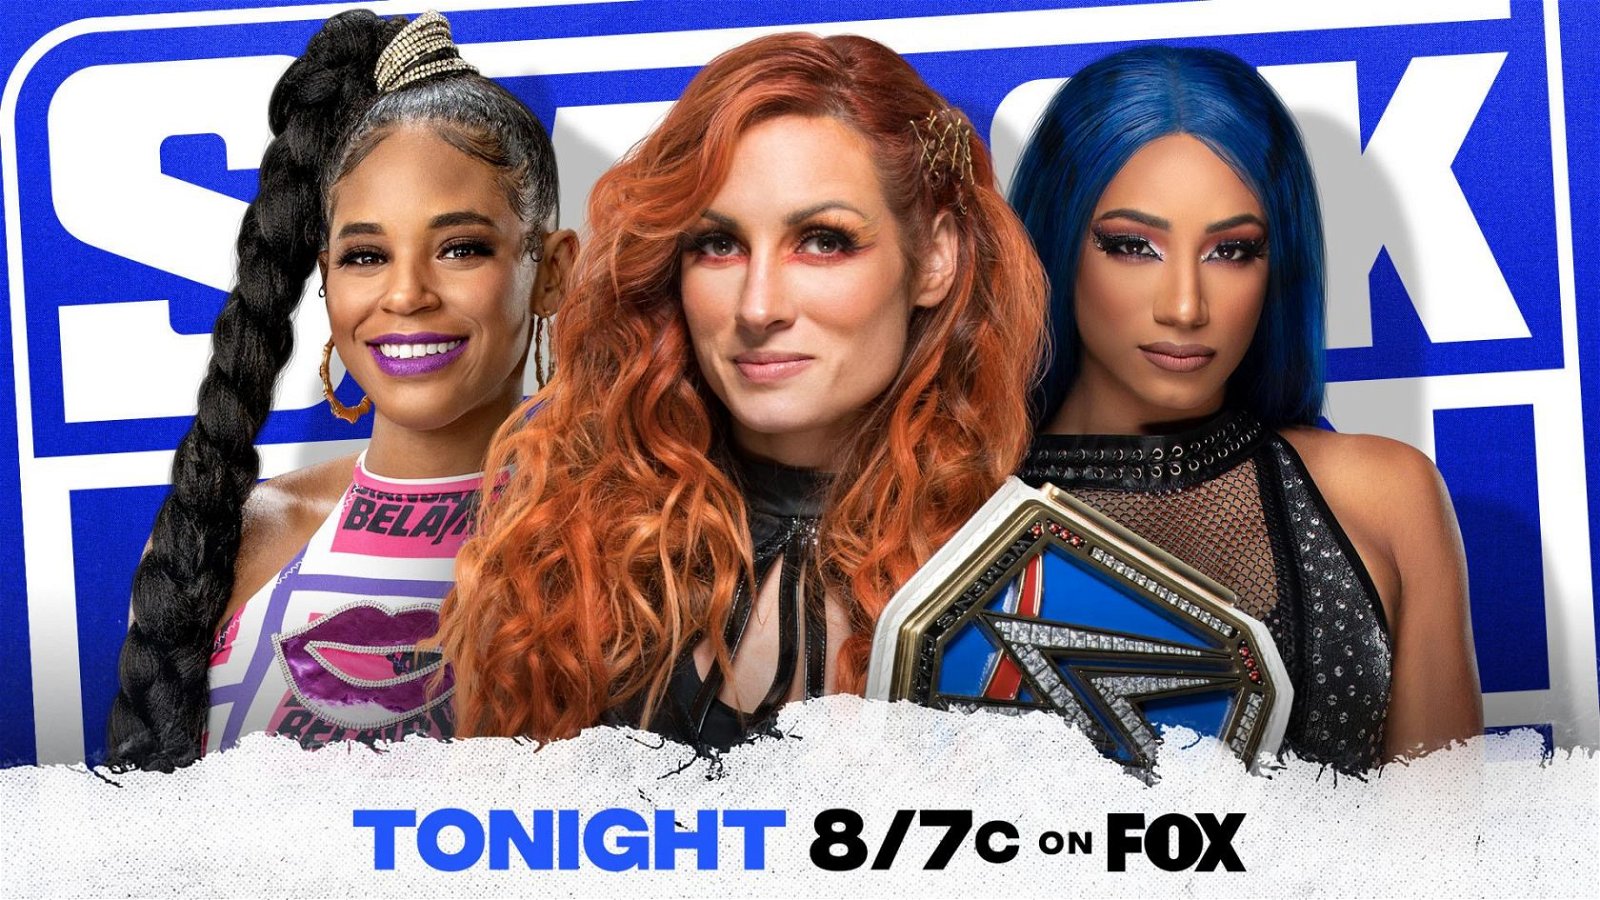 WWE SmackDown Live Results – October 8, 2021